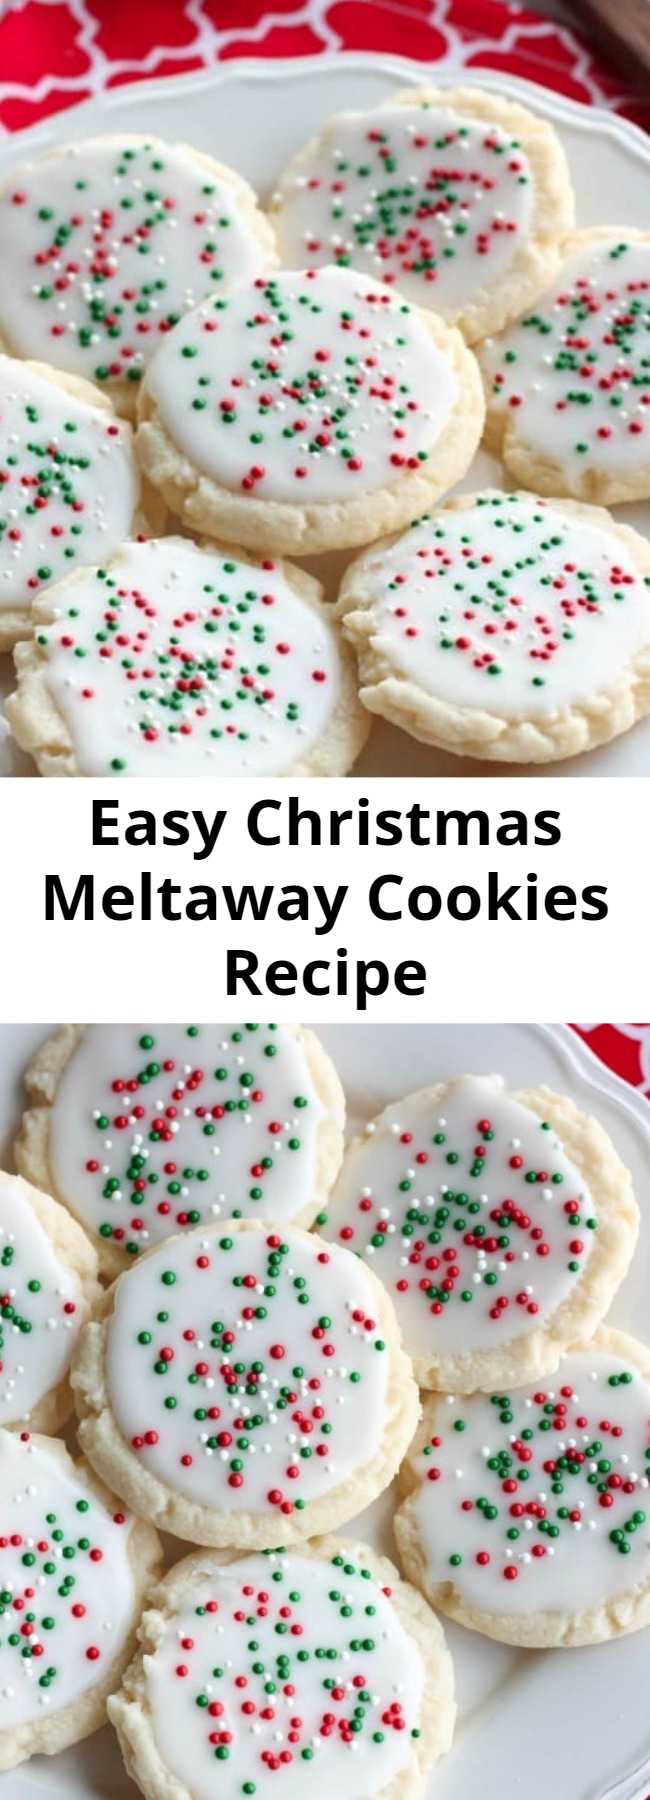 Easy Christmas Meltaway Cookies Recipe - Meltaway cookies are a soft, lightly sweet shortbread cookie that literally melts away in your mouth. Top it with a thin glaze and red and green sprinkles for a festive Christmas cookie treat. #christmascookies #cookieexchange